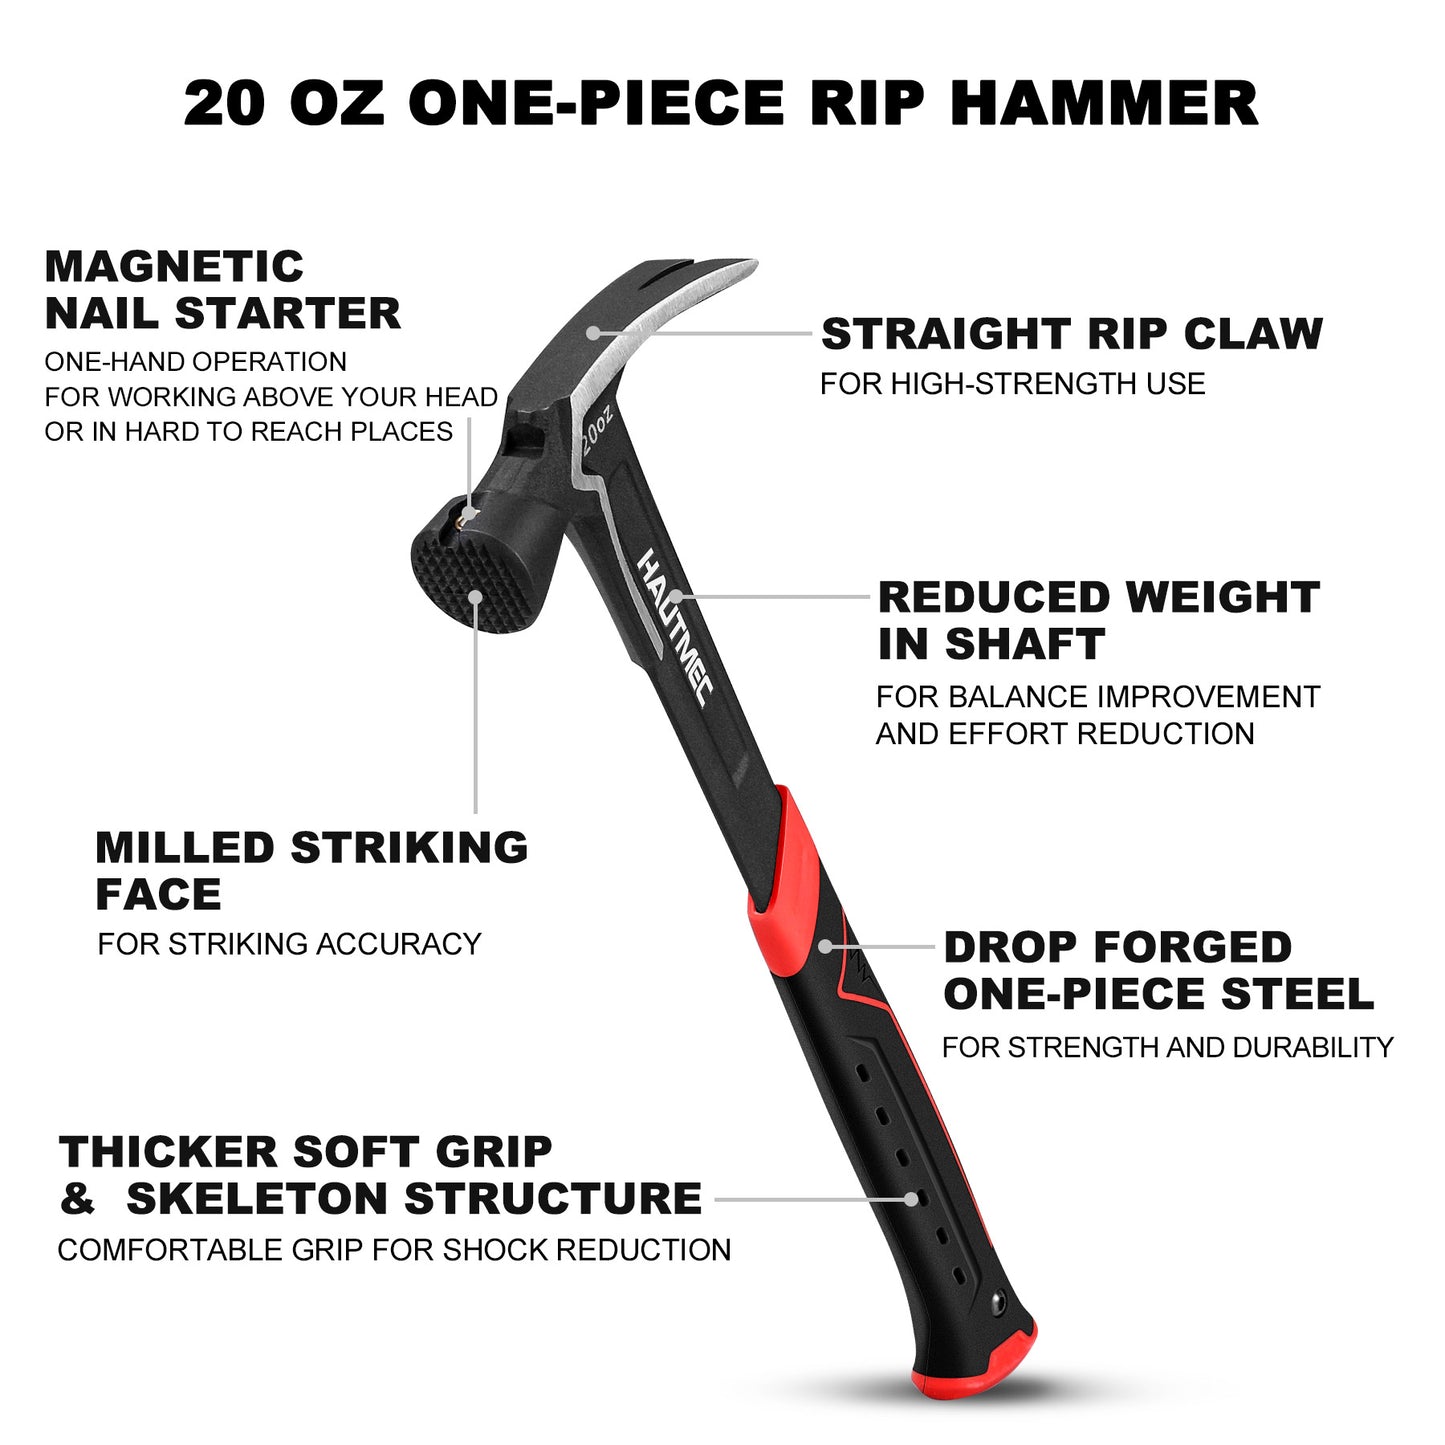 HAUTMEC 20 oz. One Piece Forged Framing Hammer With Straight Rip Claw, Milled Face, Shock-Absorbing Grip, with Magnetic Nail Holder, HT0371-HM